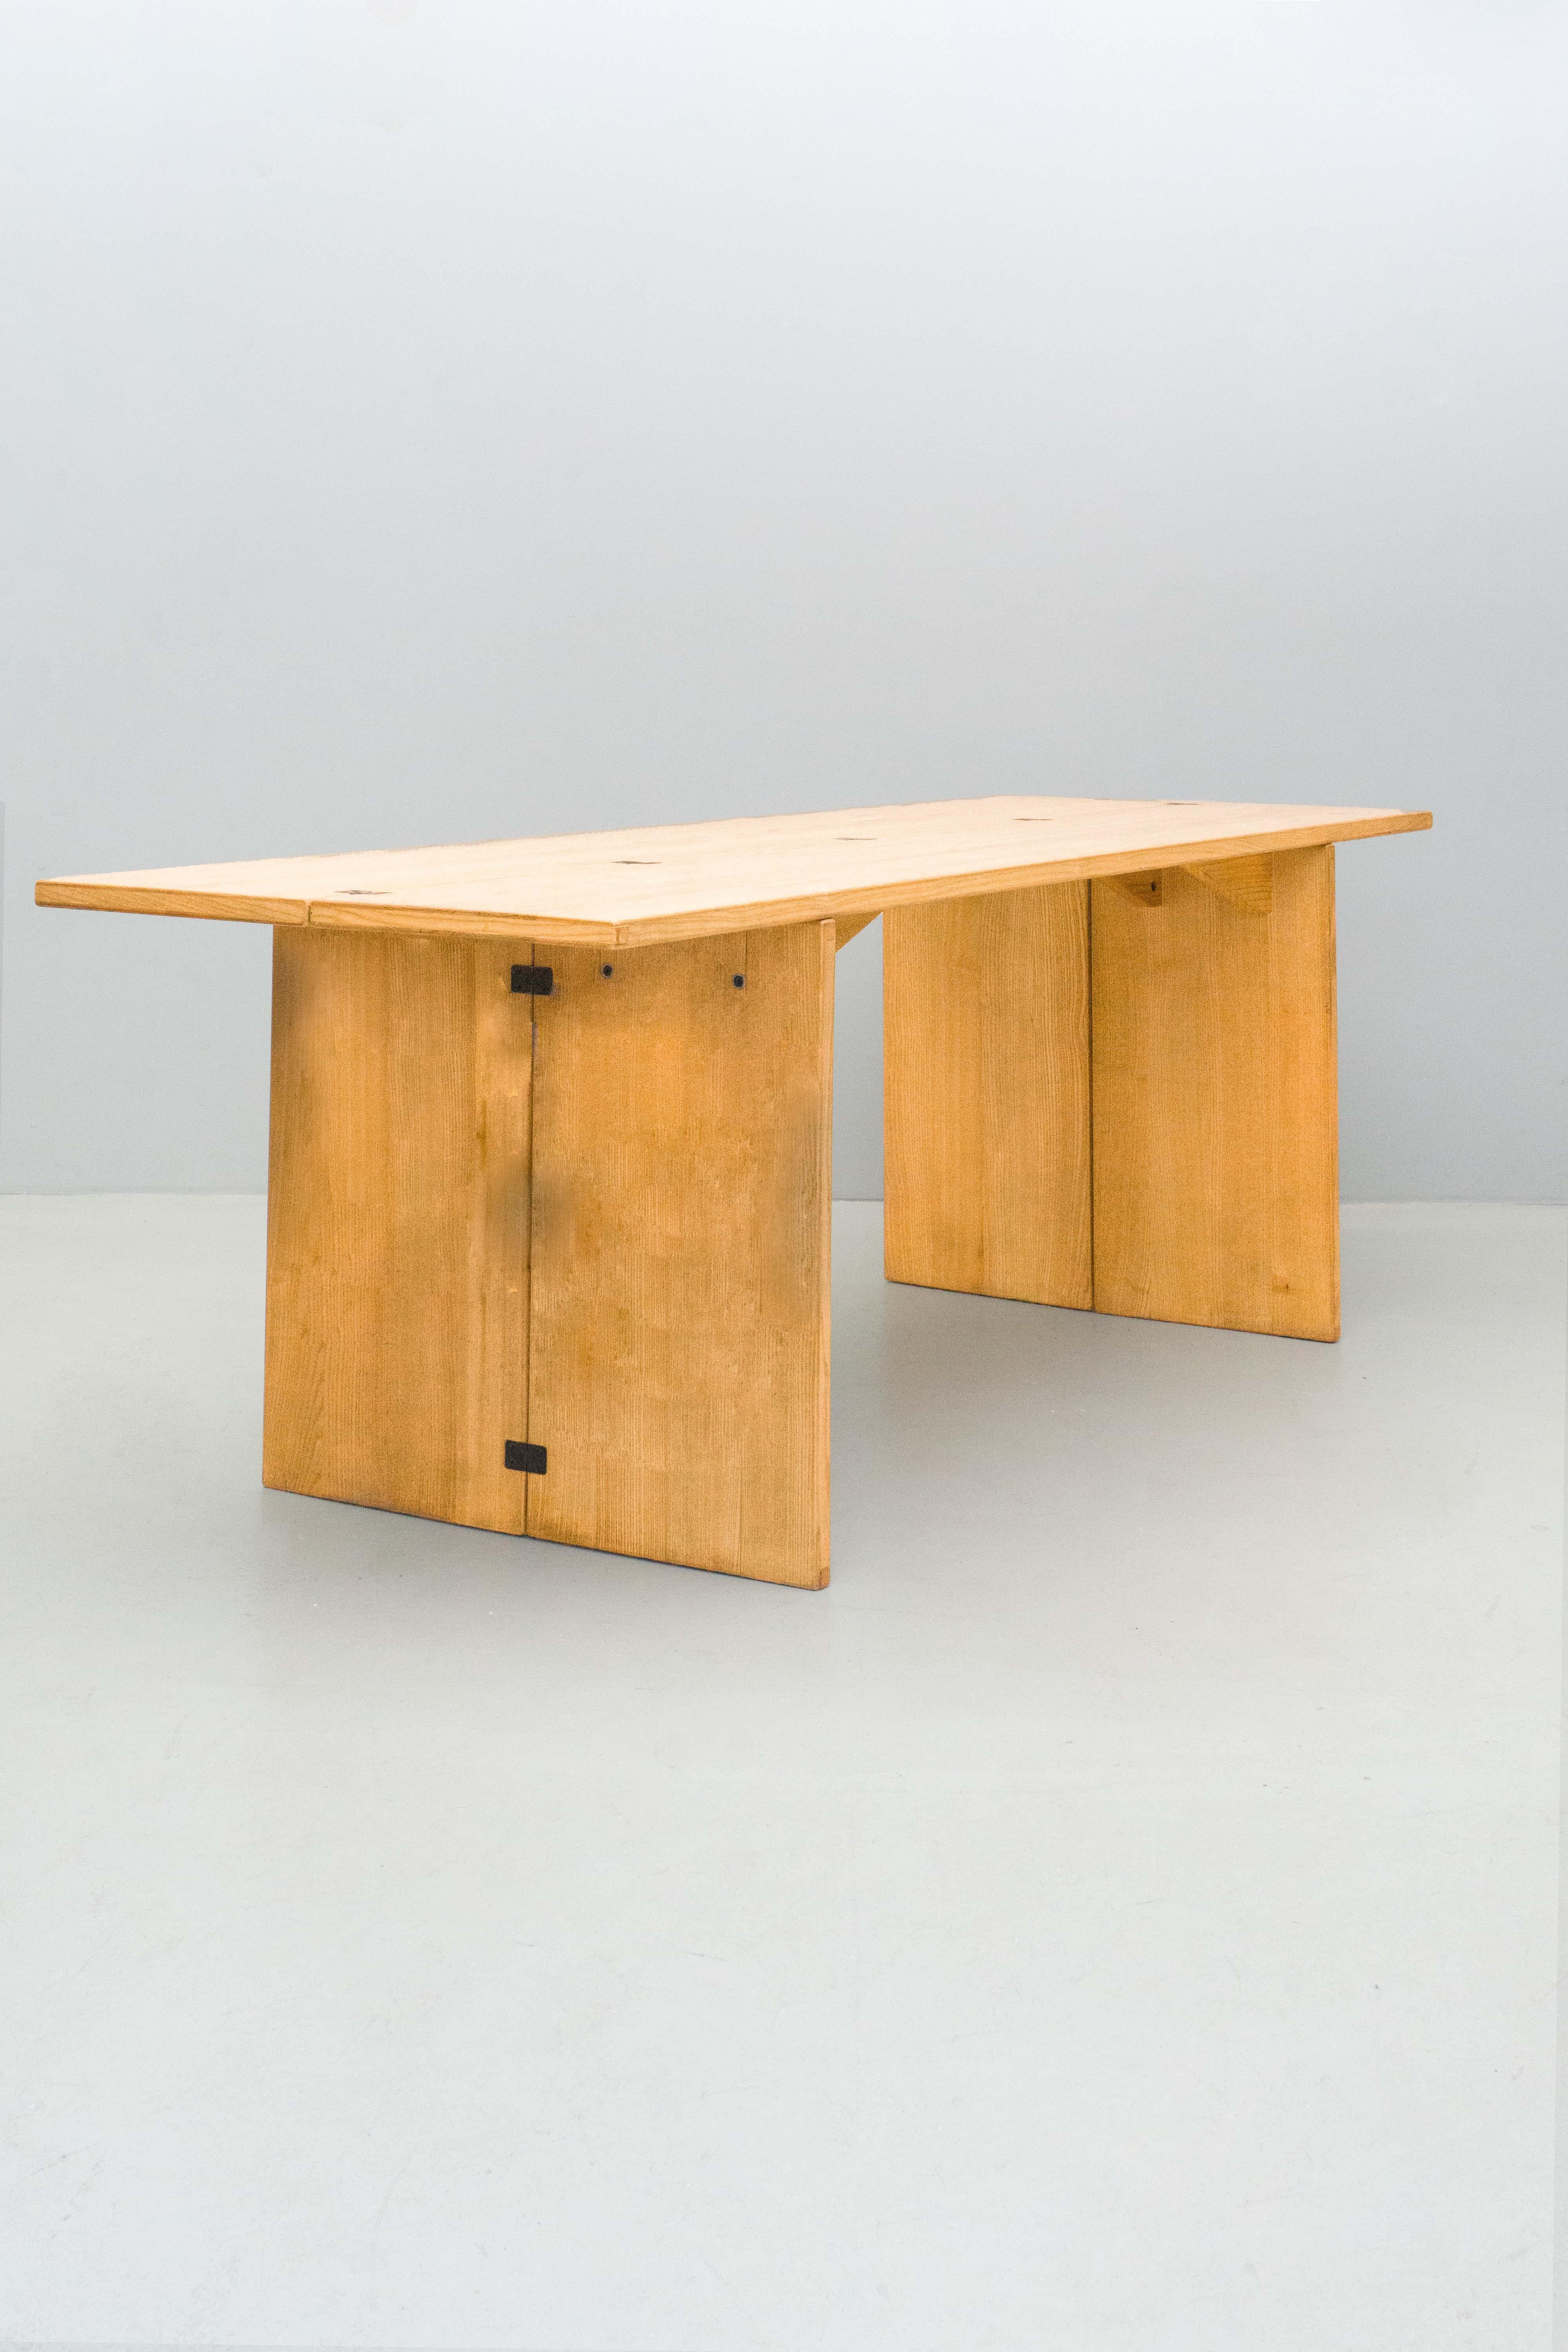 This table can work as a console table or also as an elegant dining room table or desk. It’s a practical and elegant piece. What makes it so practical? You can fold the legs and also the surface of the table to use it in different occasions. 
The